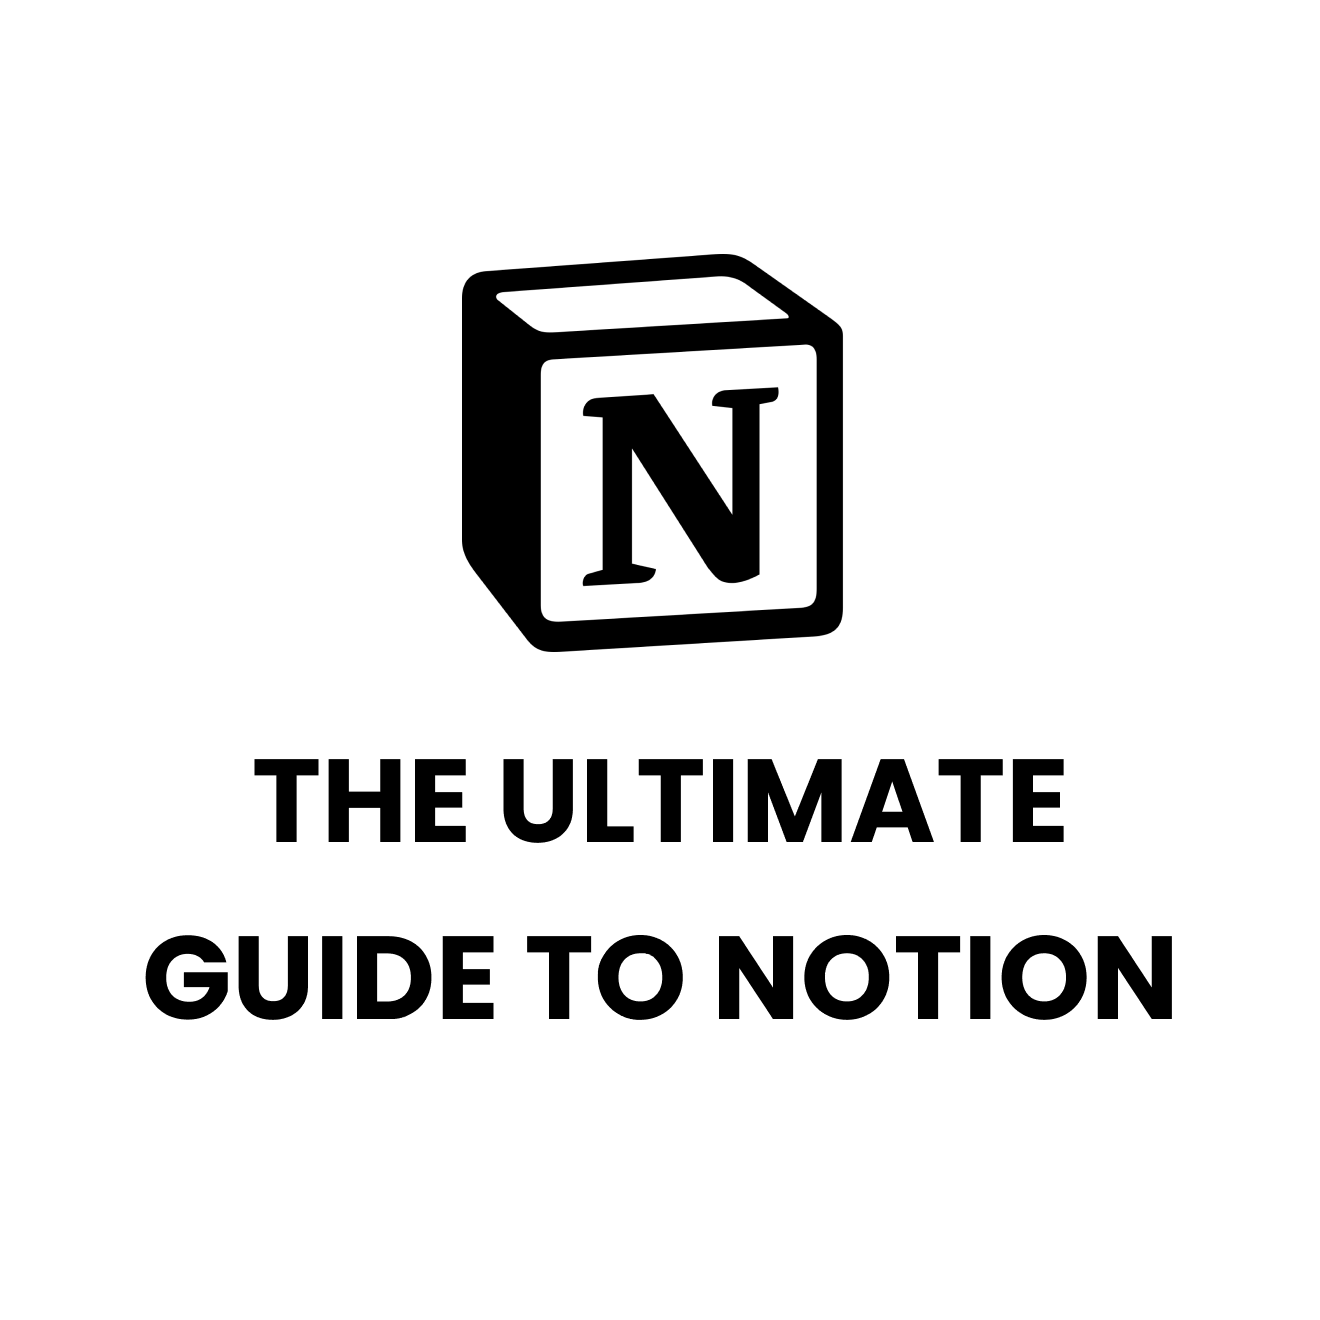 The Ultimate Guide to Notion